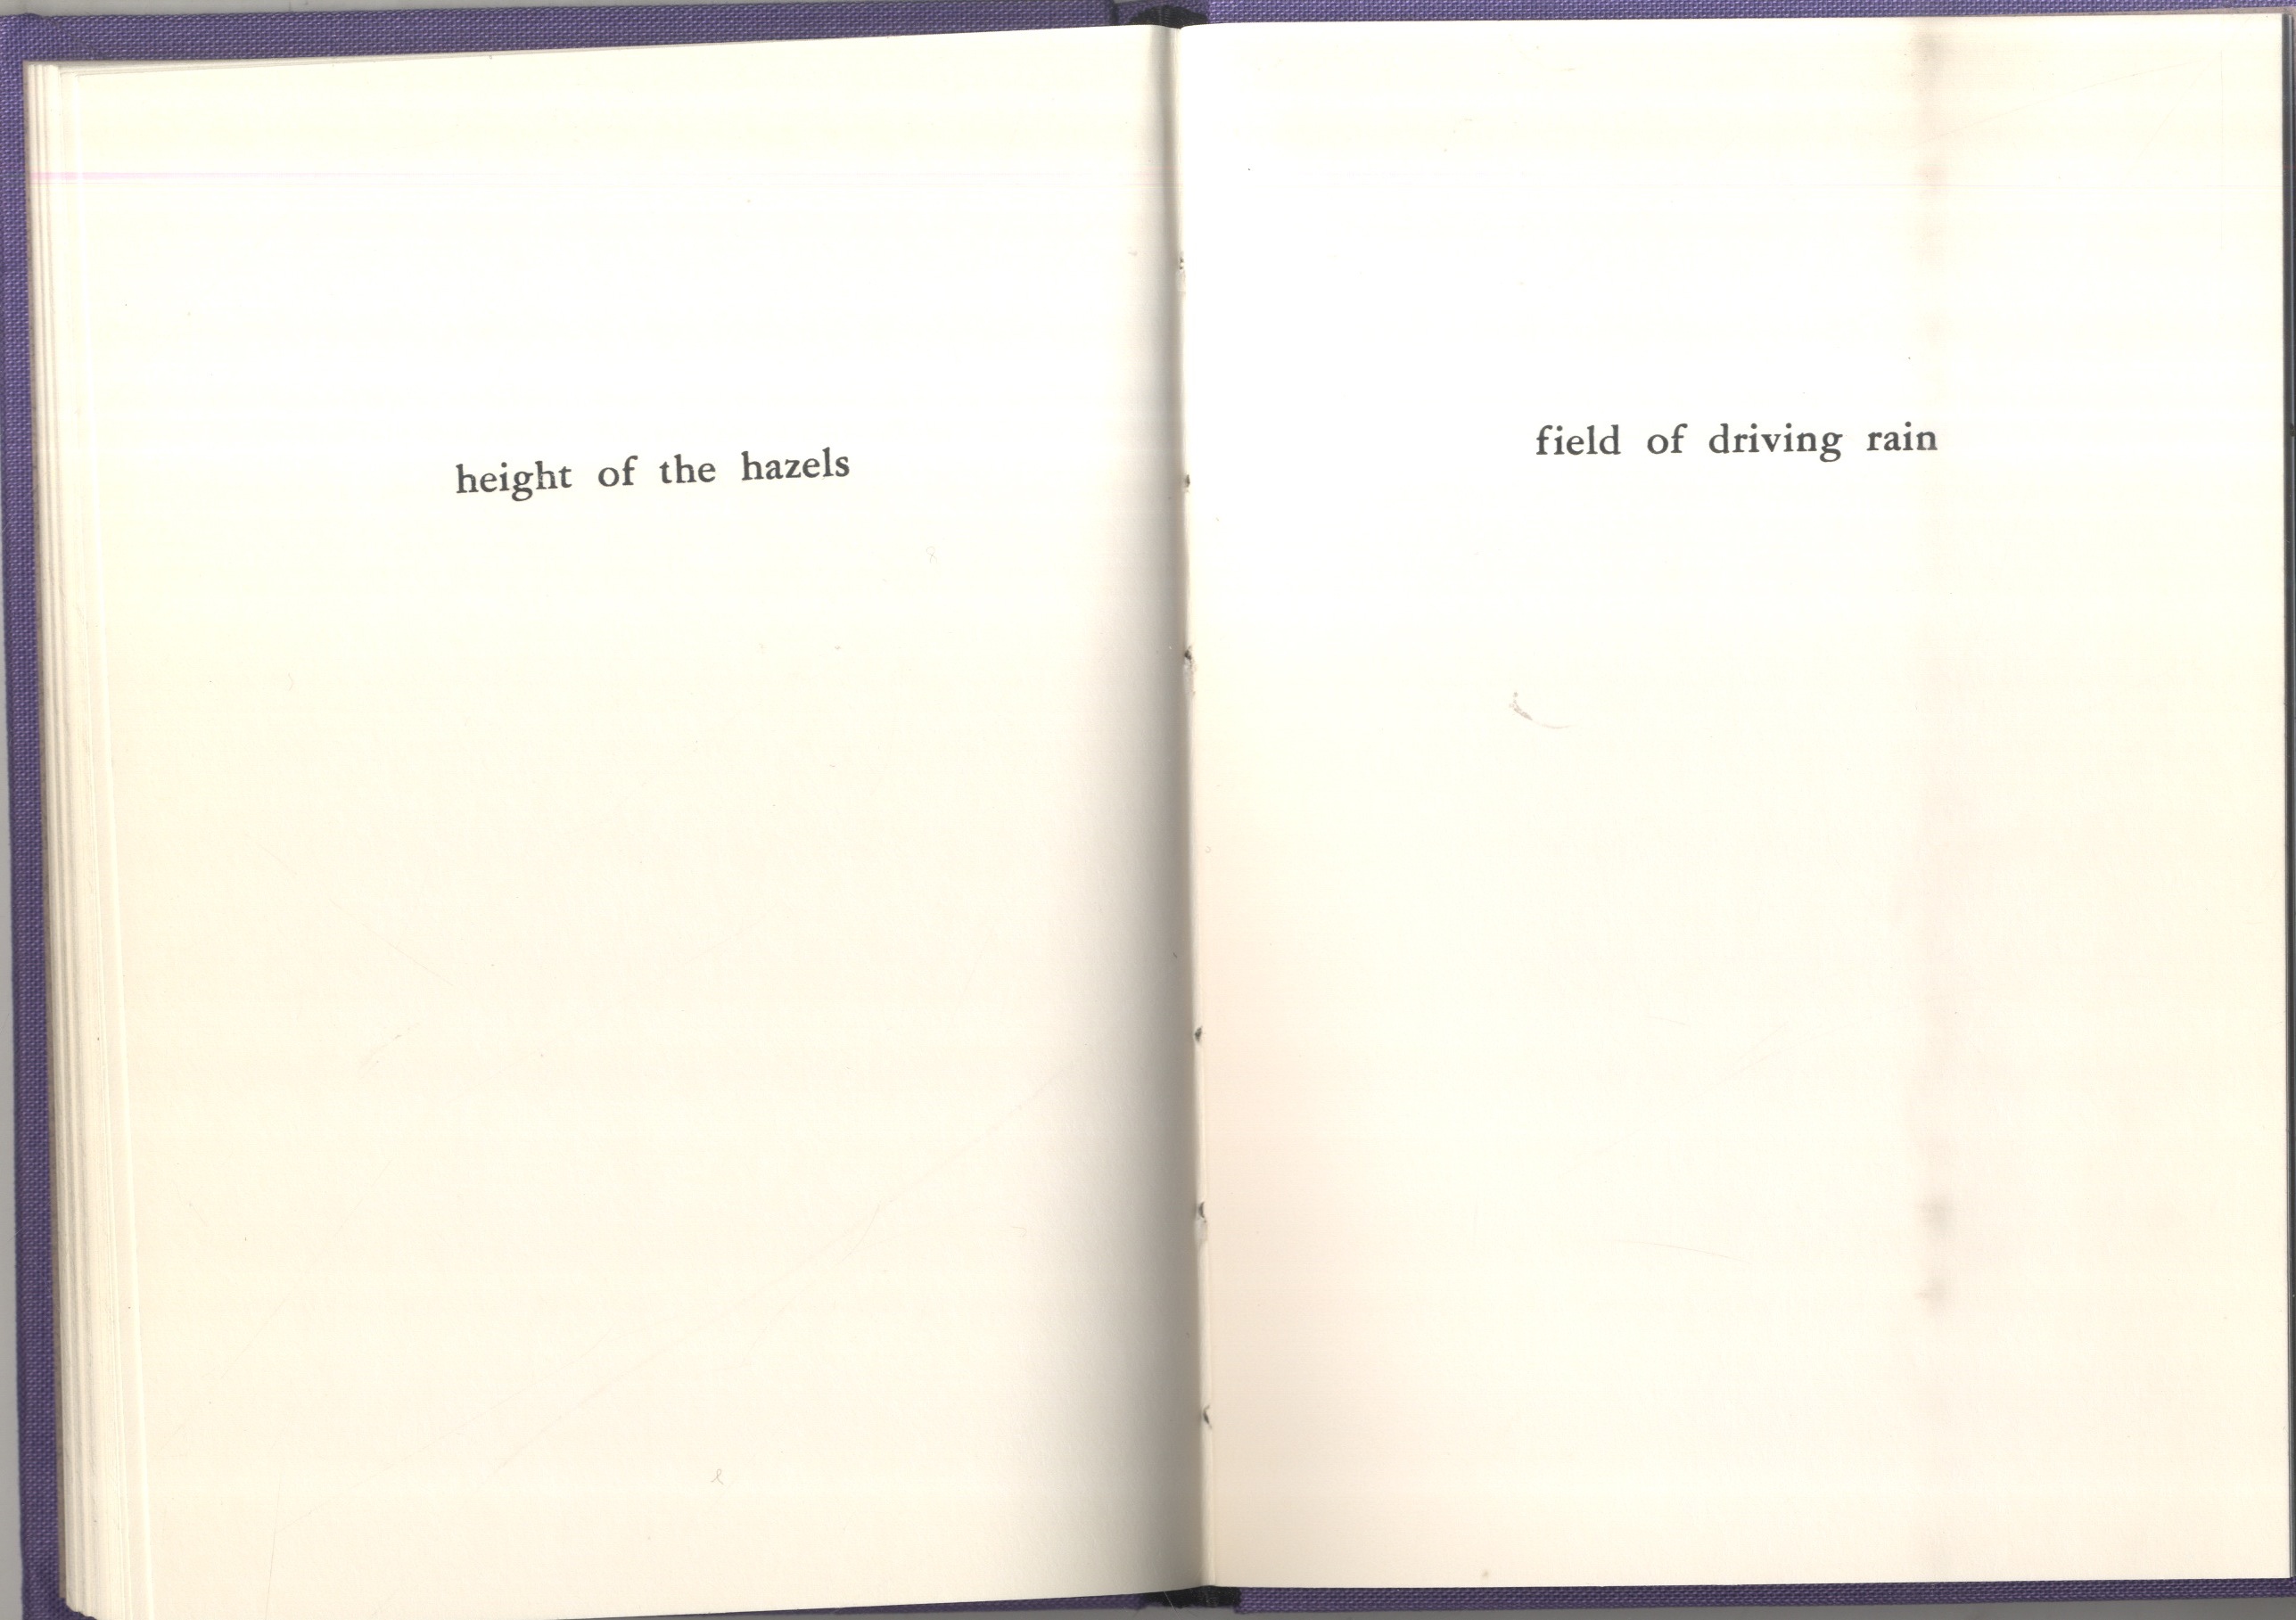 Pages from One Hundred Scottish Places by Thomas A. Clark